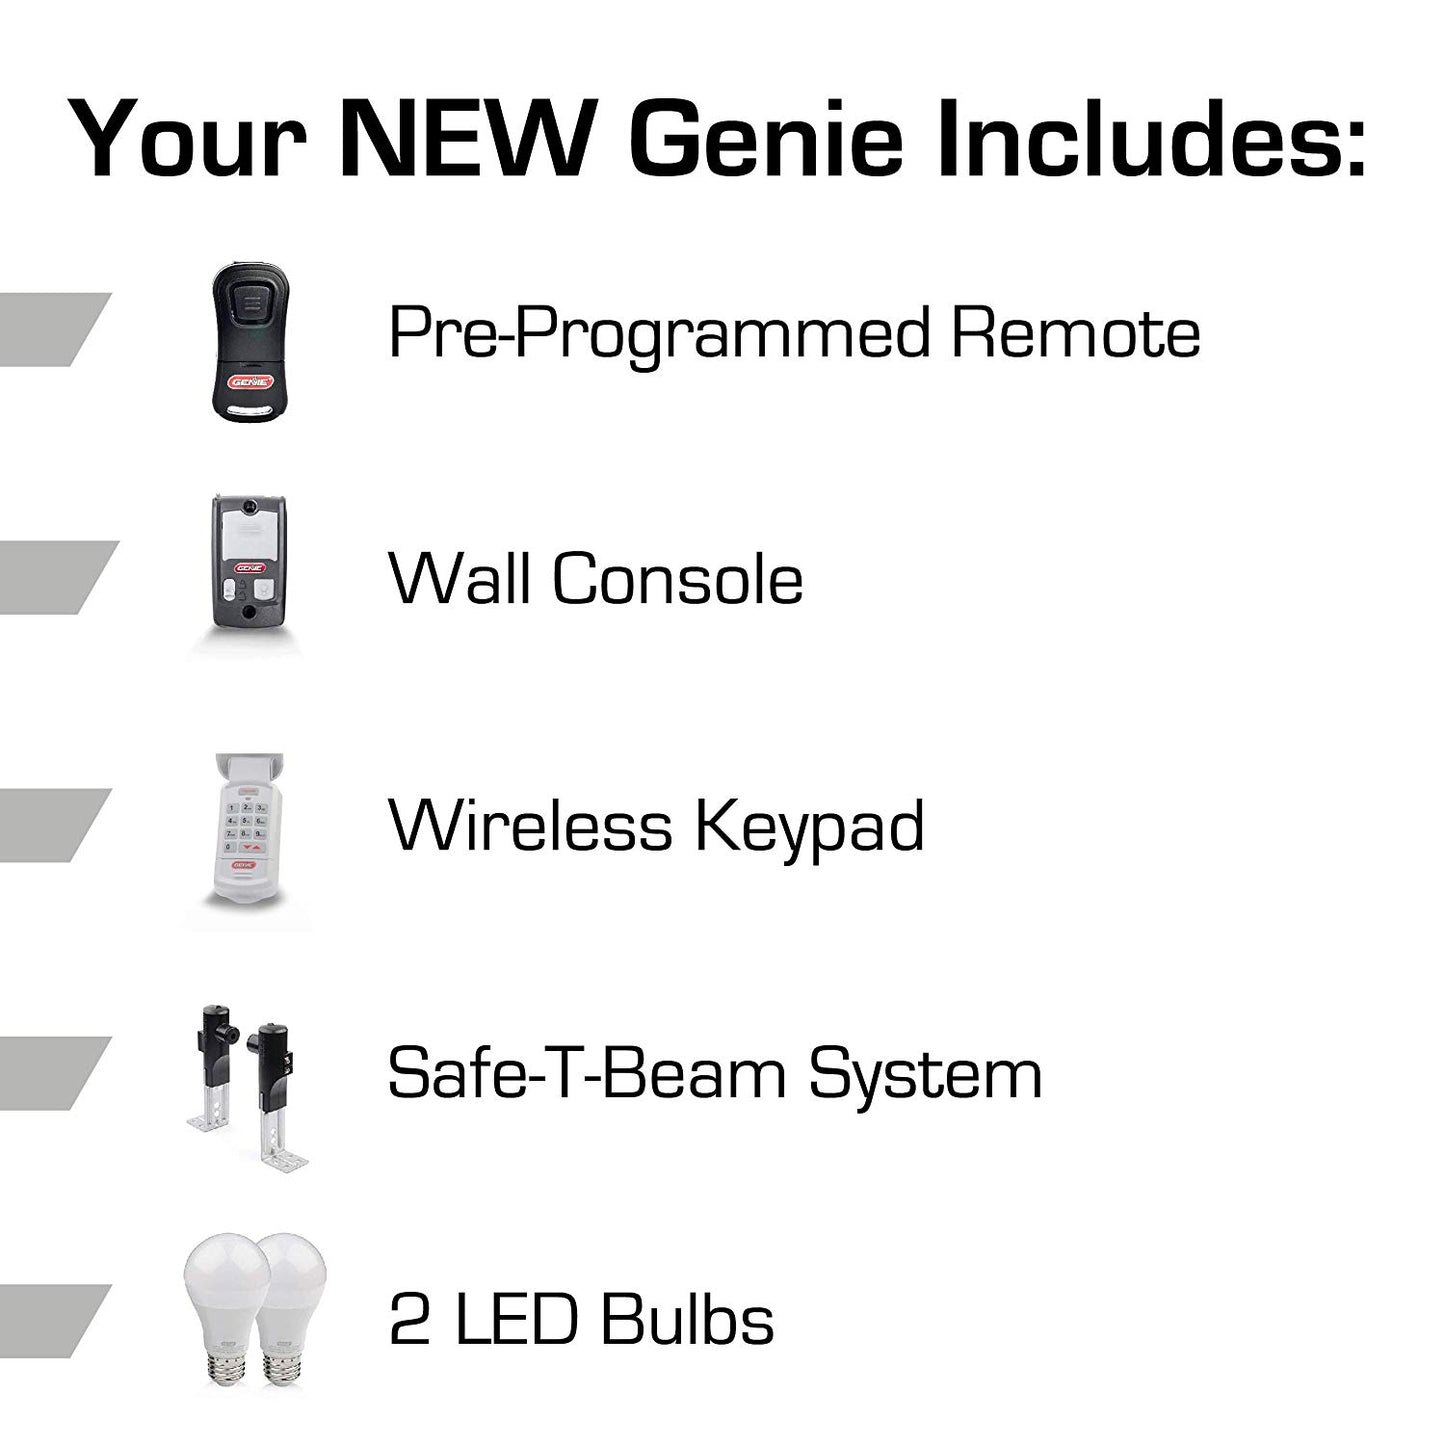 This Genie garage door opener includes a pre-programmed remote, wall console, wireless keypad, safe-t-beams, and two LED garage door opener light bulbs 